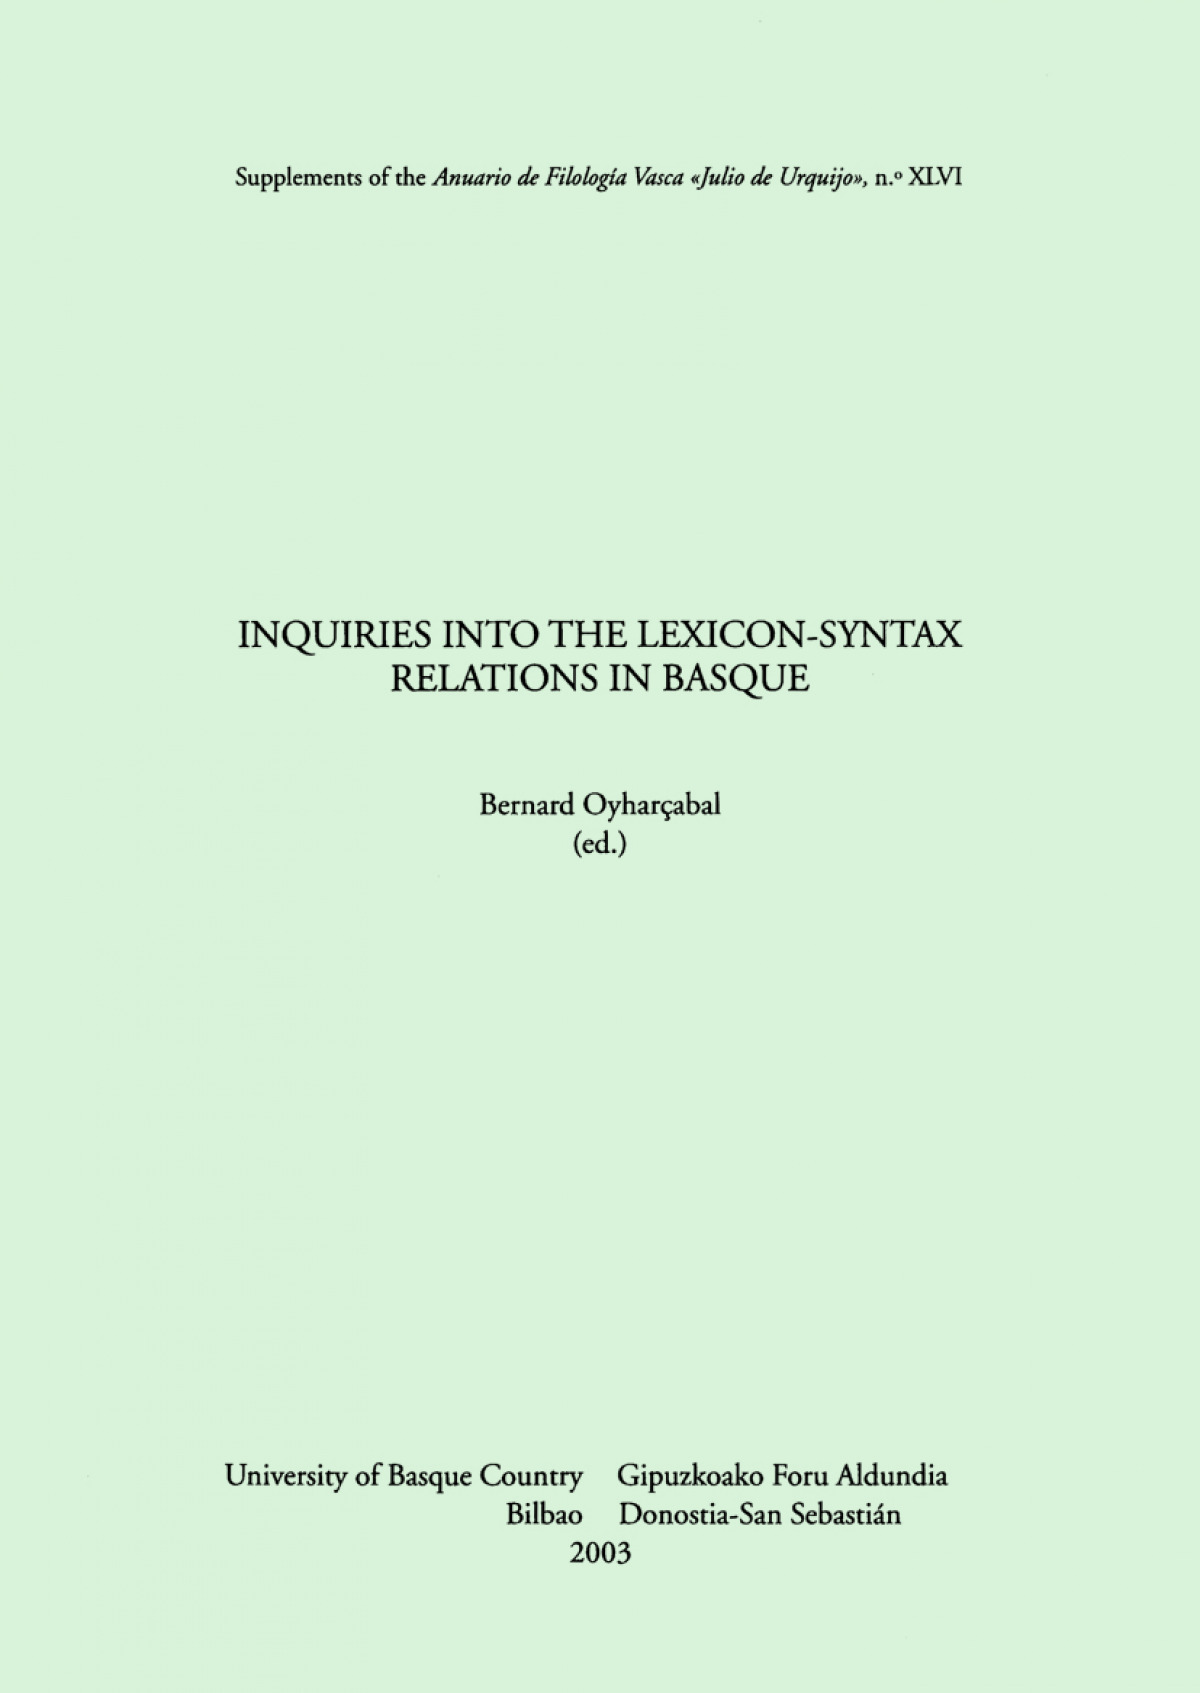 Inquiries into the lexicon-syntax relations in Basque - Oyharçabal, Bernard